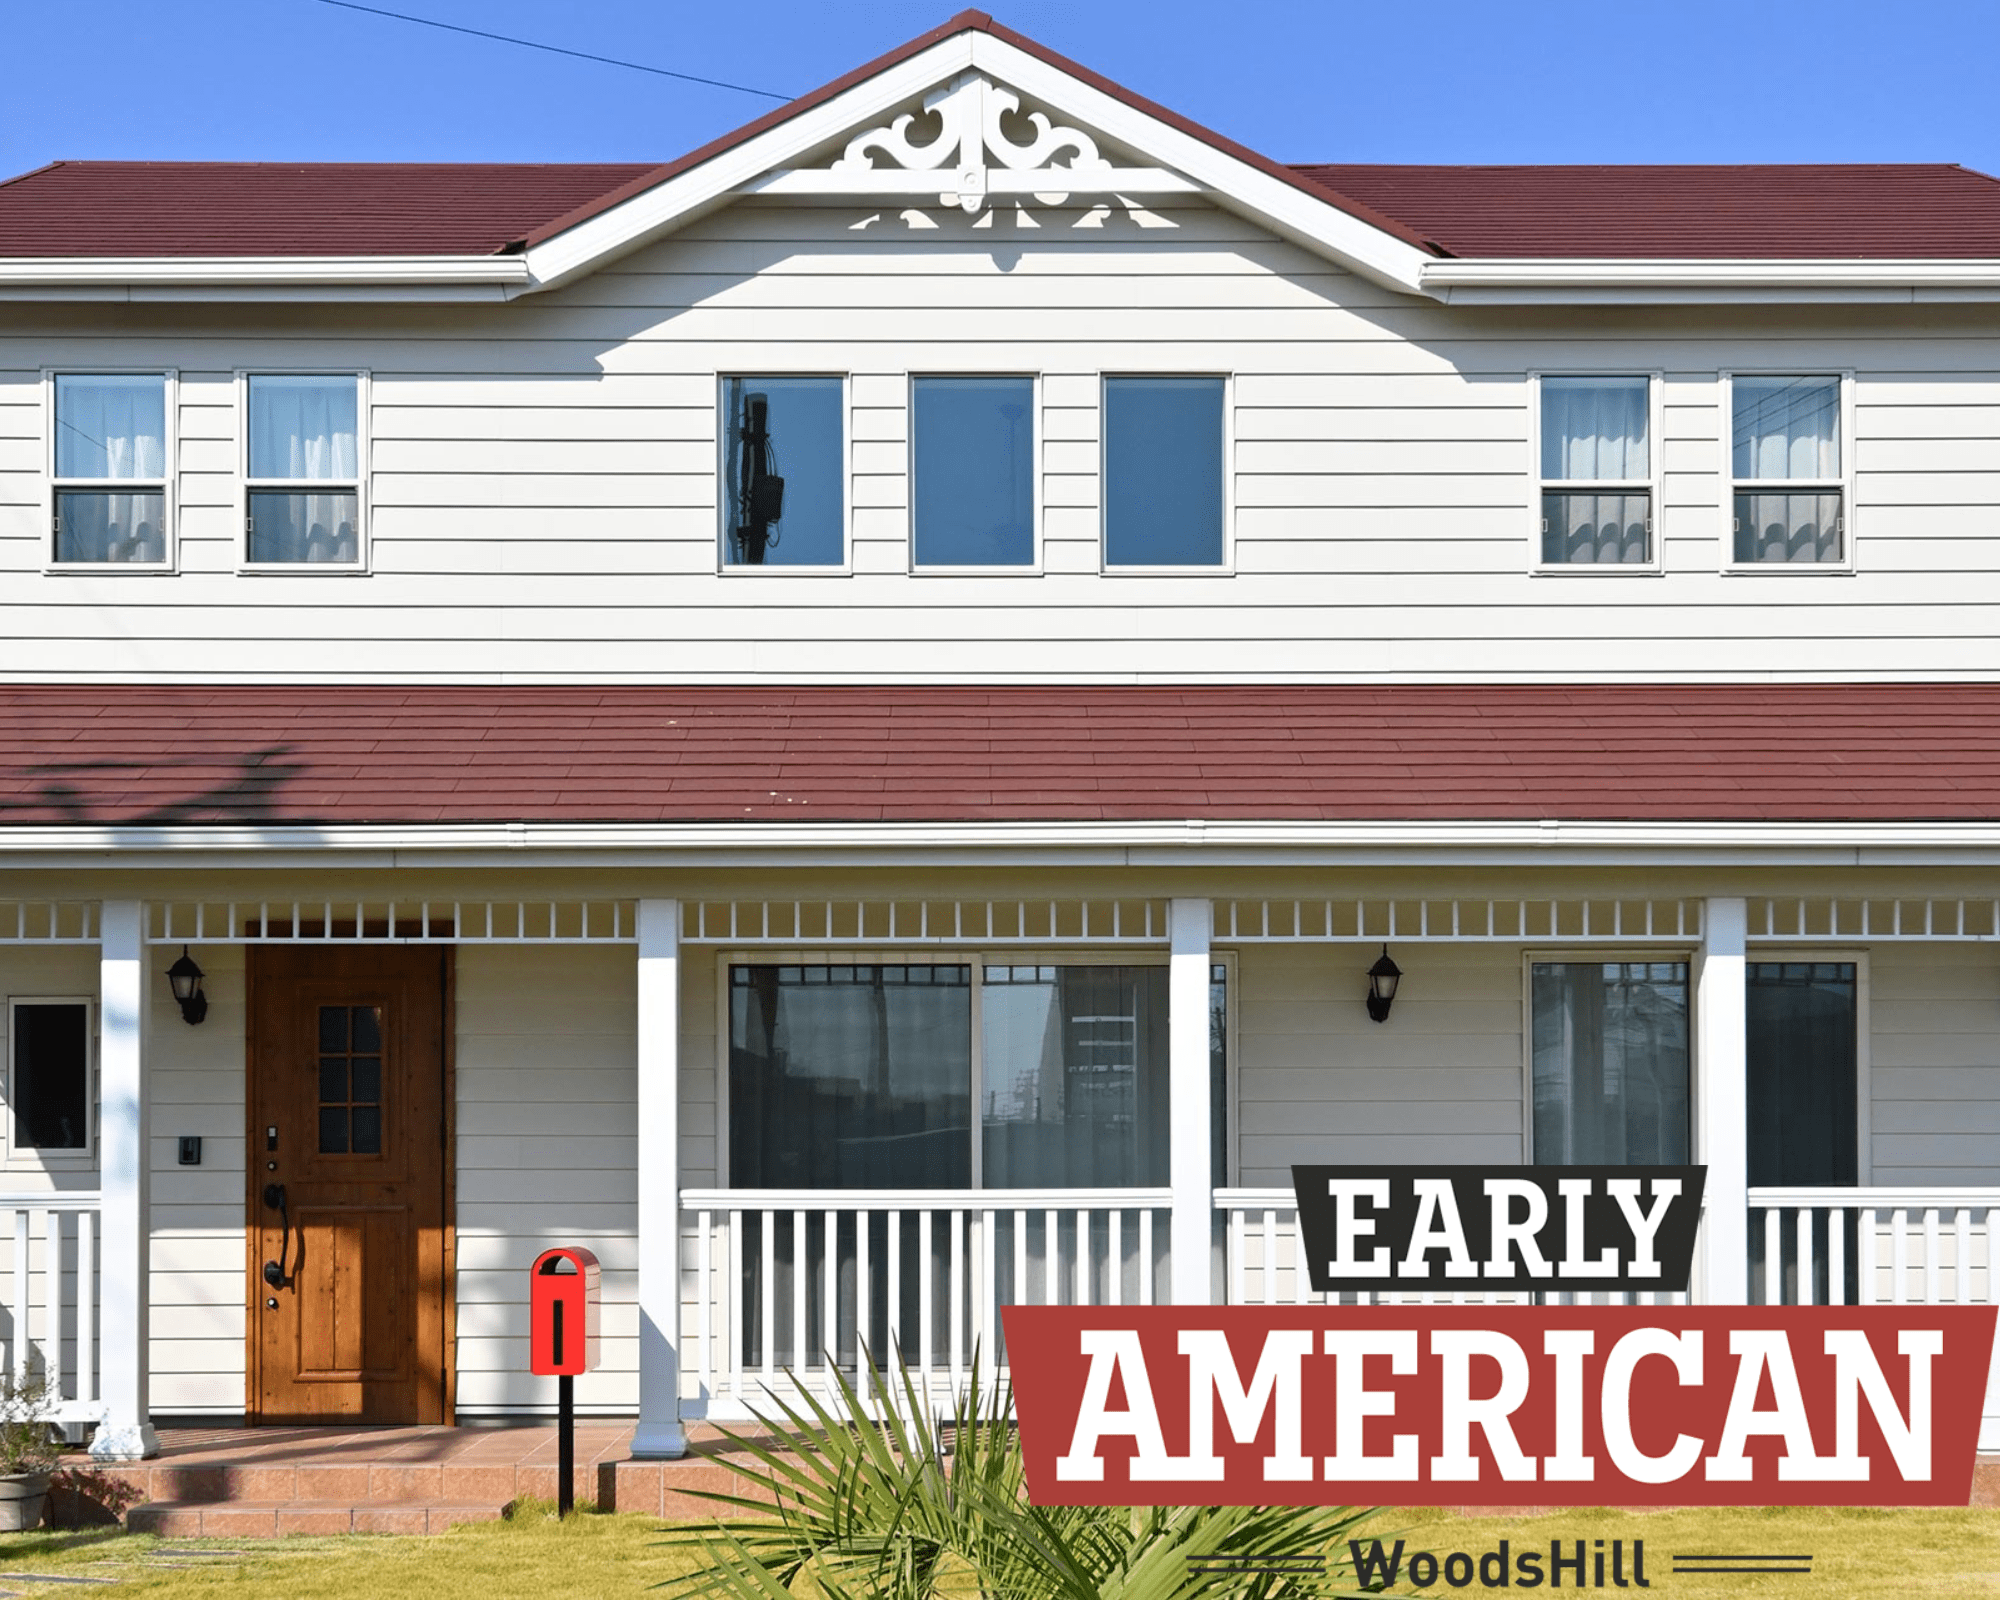 RED AMERICAN HOUSE